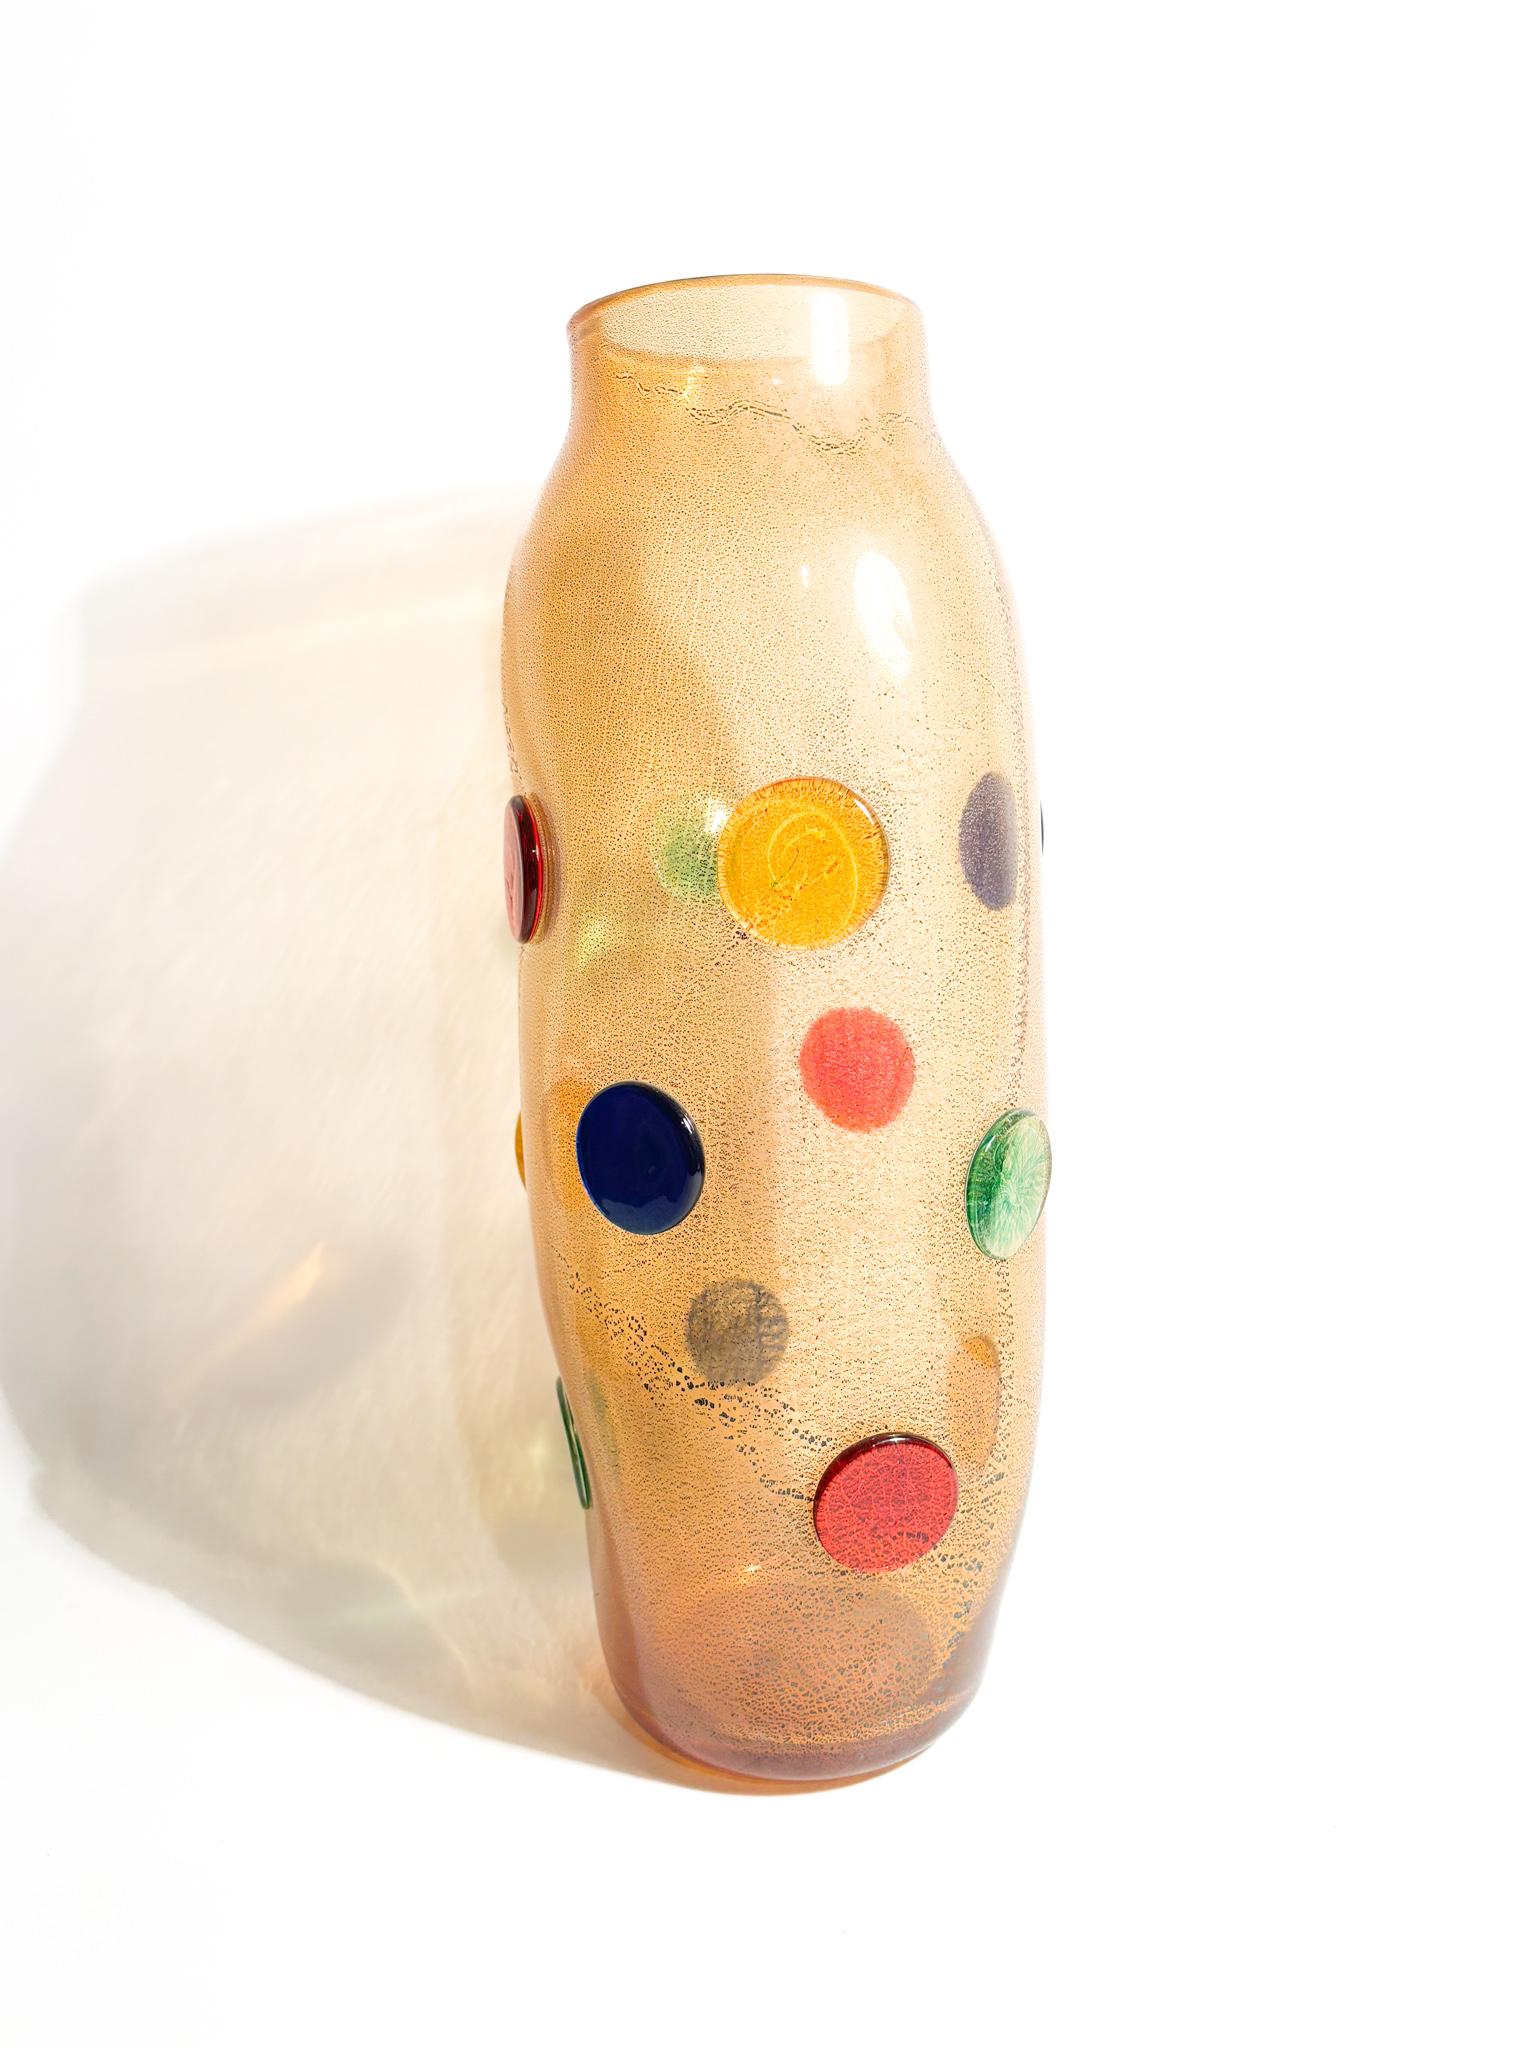 Late 20th Century La Murrina Vase in Multicolored Murano Glass with Gold Leaf from the 1980s For Sale